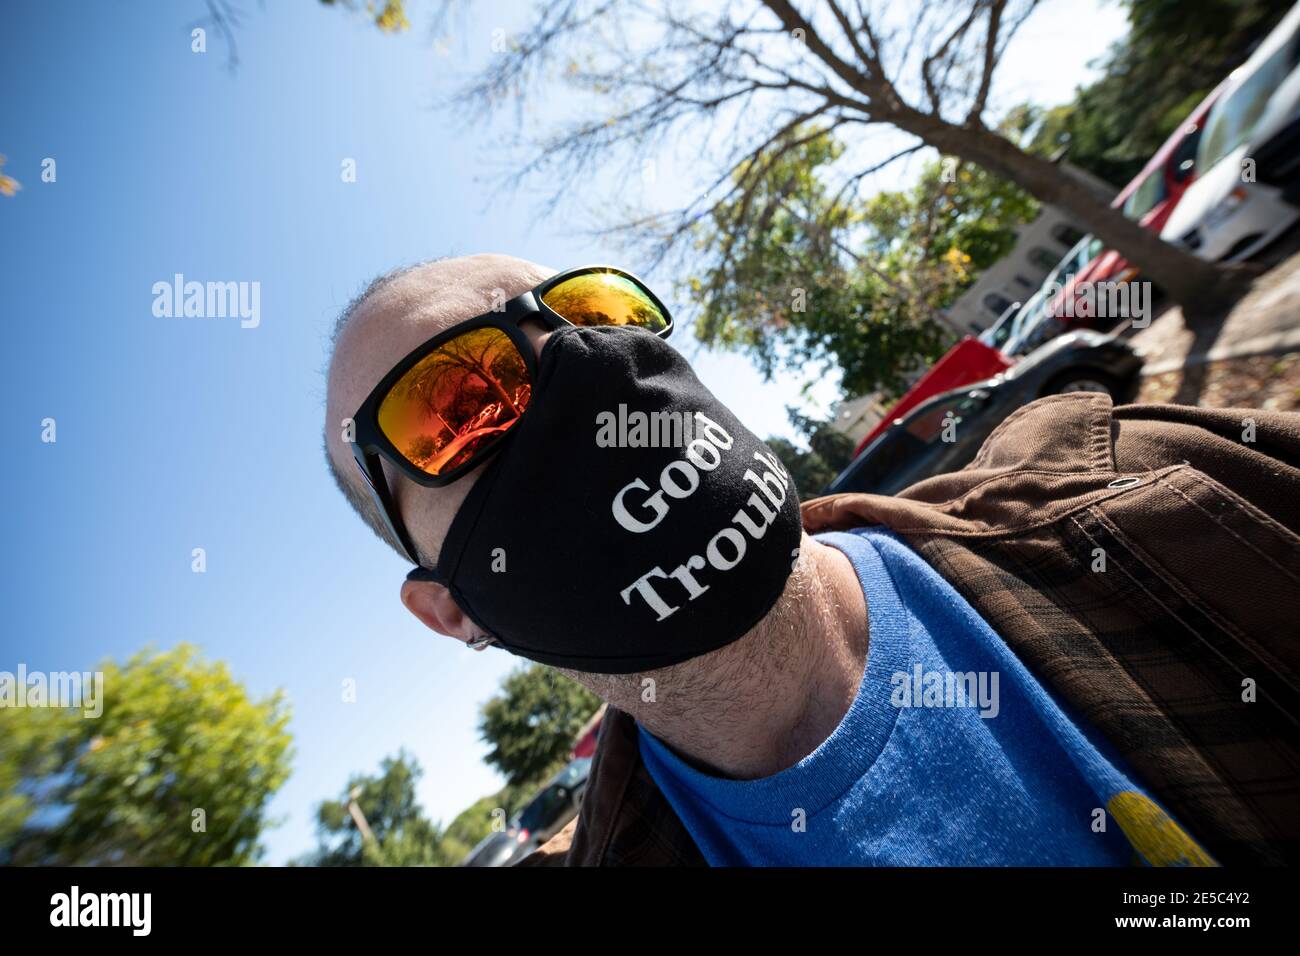 Man wearing Good Trouble mask and sunglasses. Stock Photo